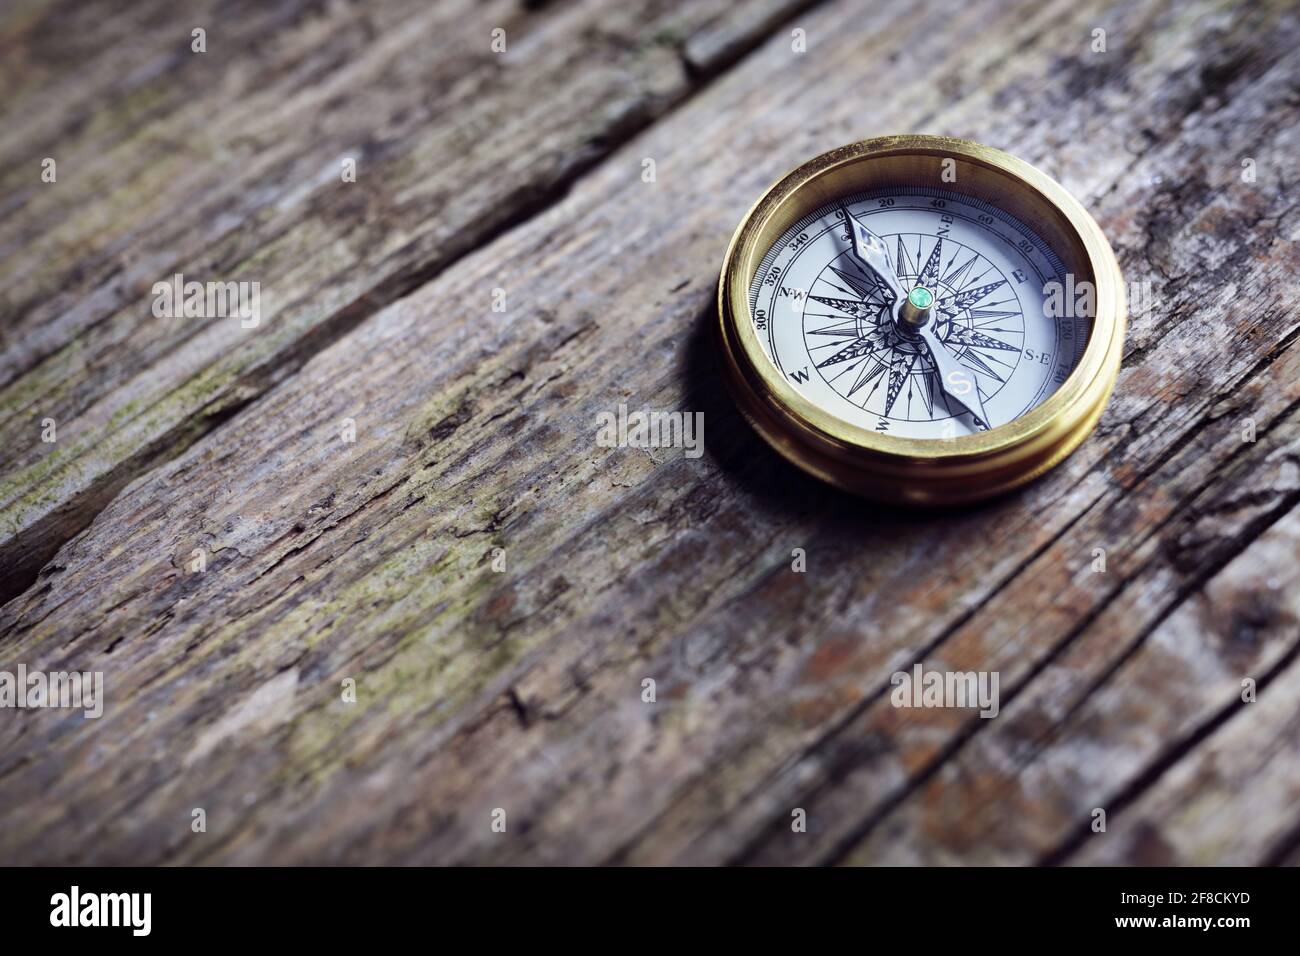 Antique golden compass on wood background concept for direction, travel, guidance or assistance Stock Photo